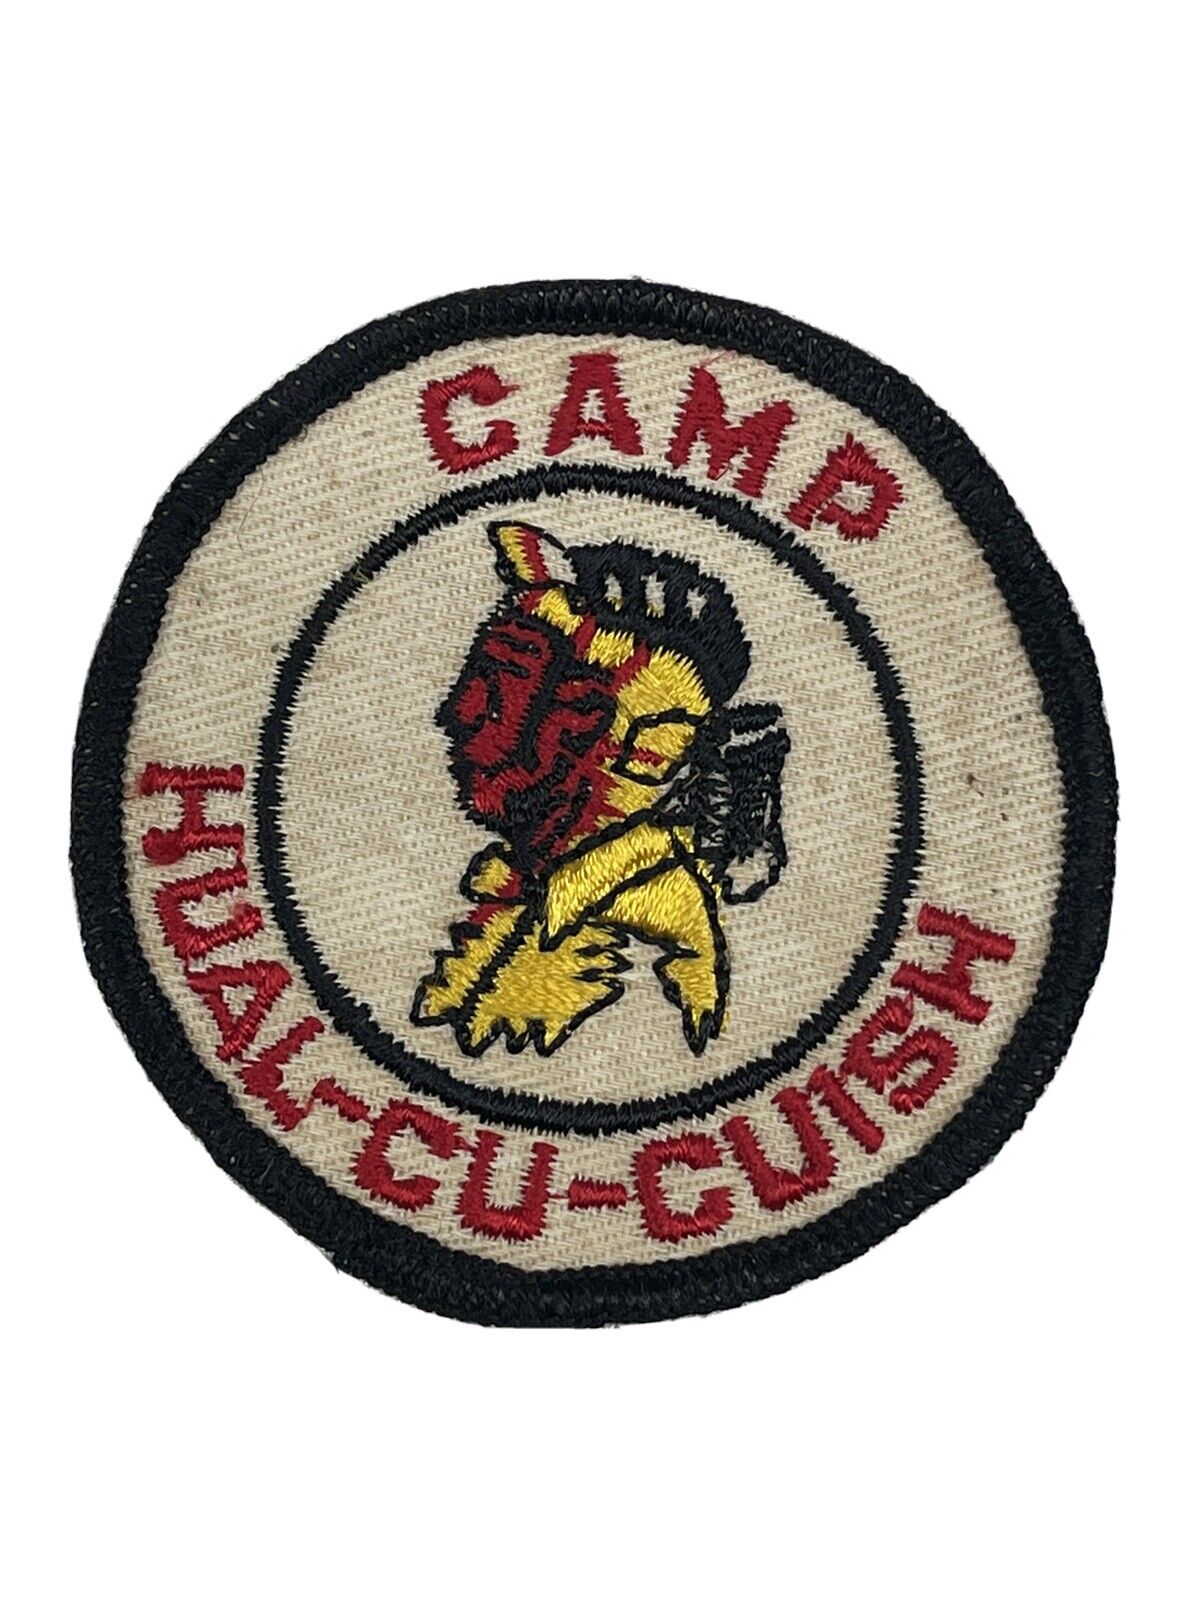 VTG 1950s CAMP HUAL CU CUISH Boy Scout PATCH San Diego County Council California